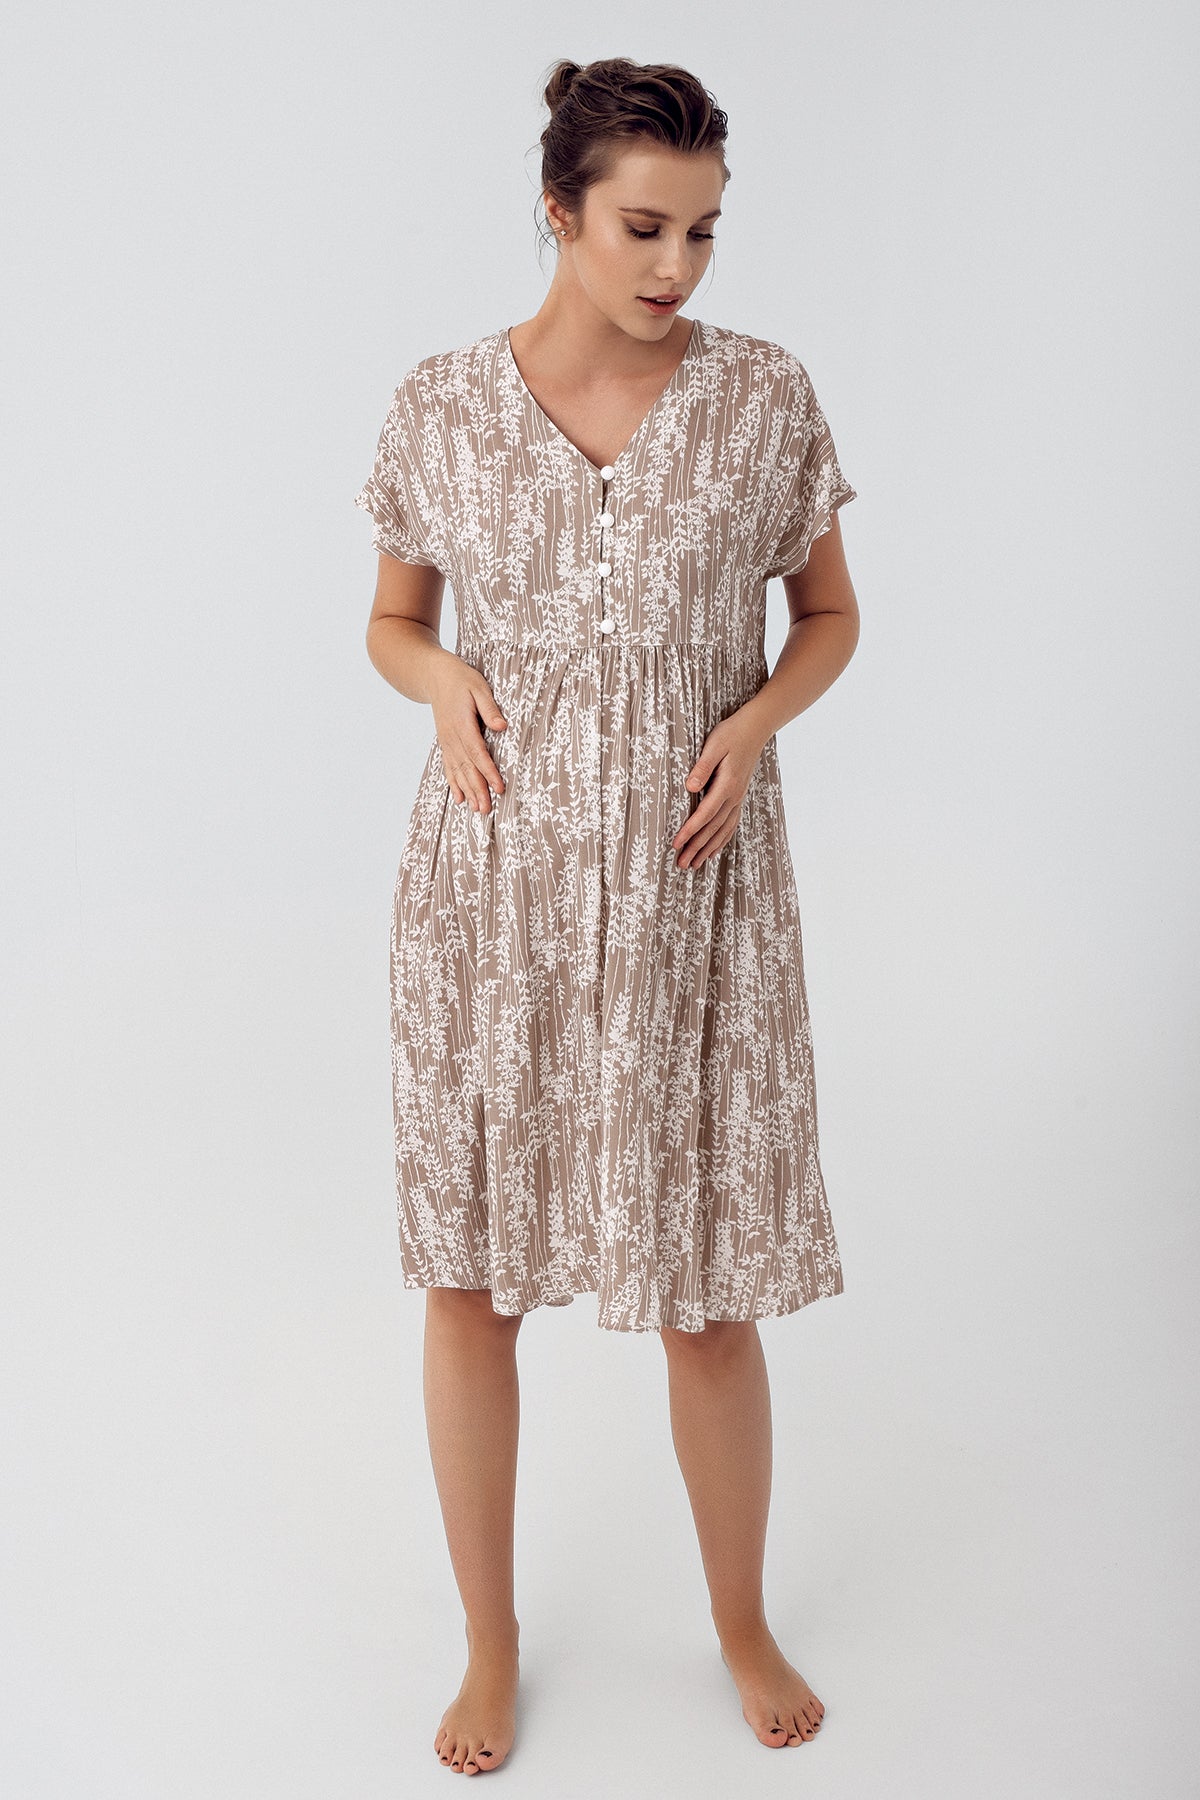 Shopymommy 16105 Patterned Maternity & Nursing Nightgown Beige